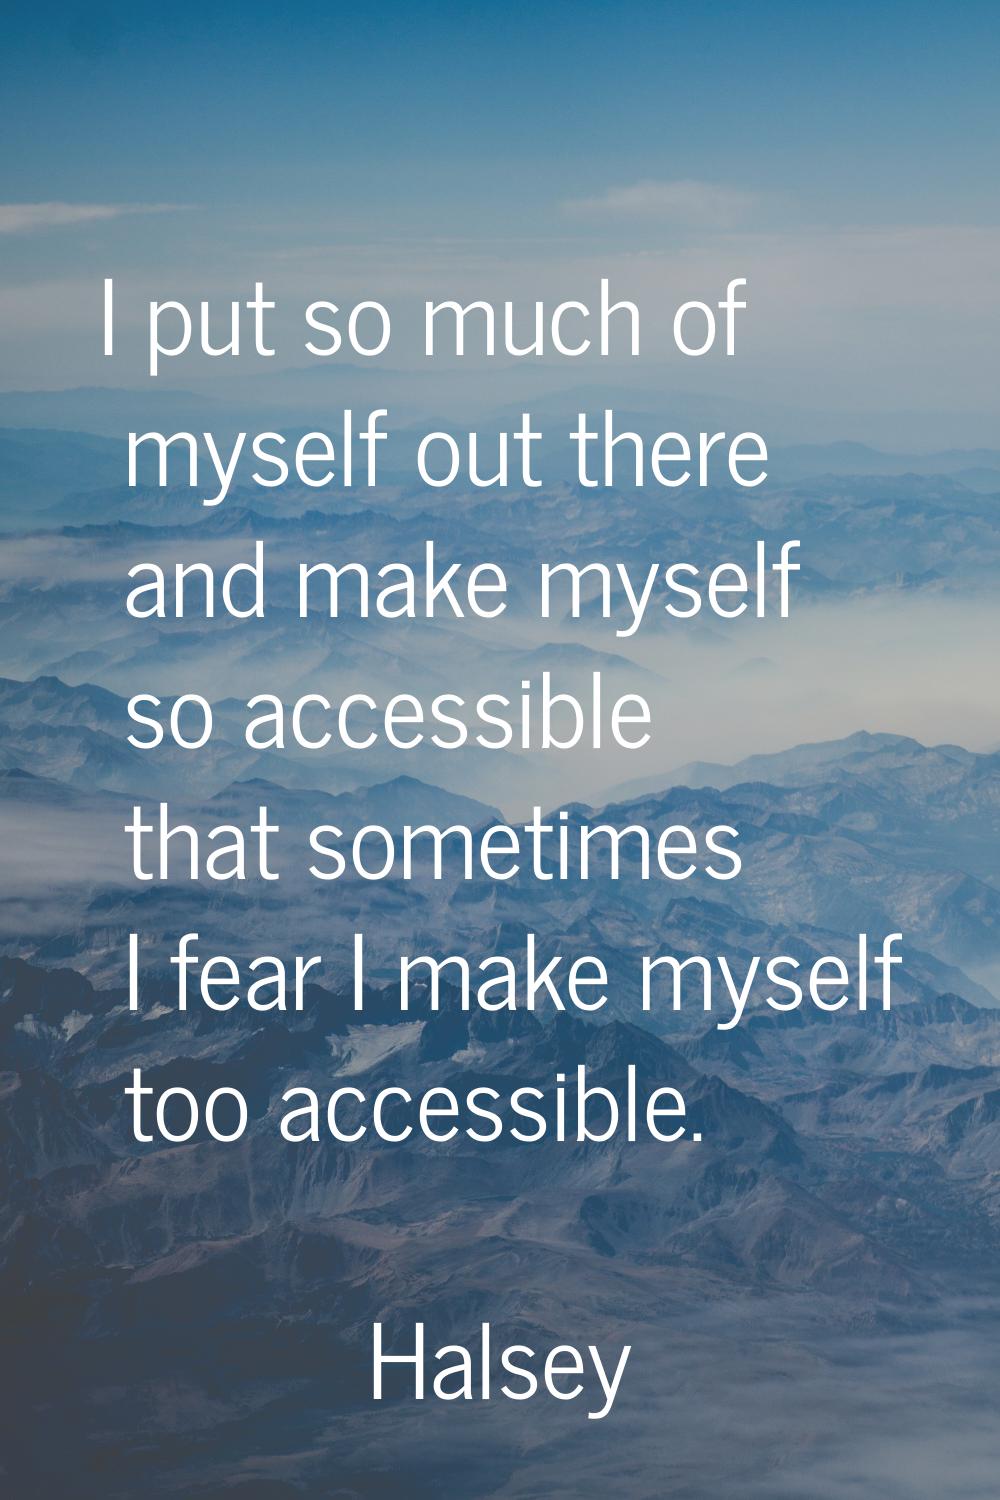 I put so much of myself out there and make myself so accessible that sometimes I fear I make myself